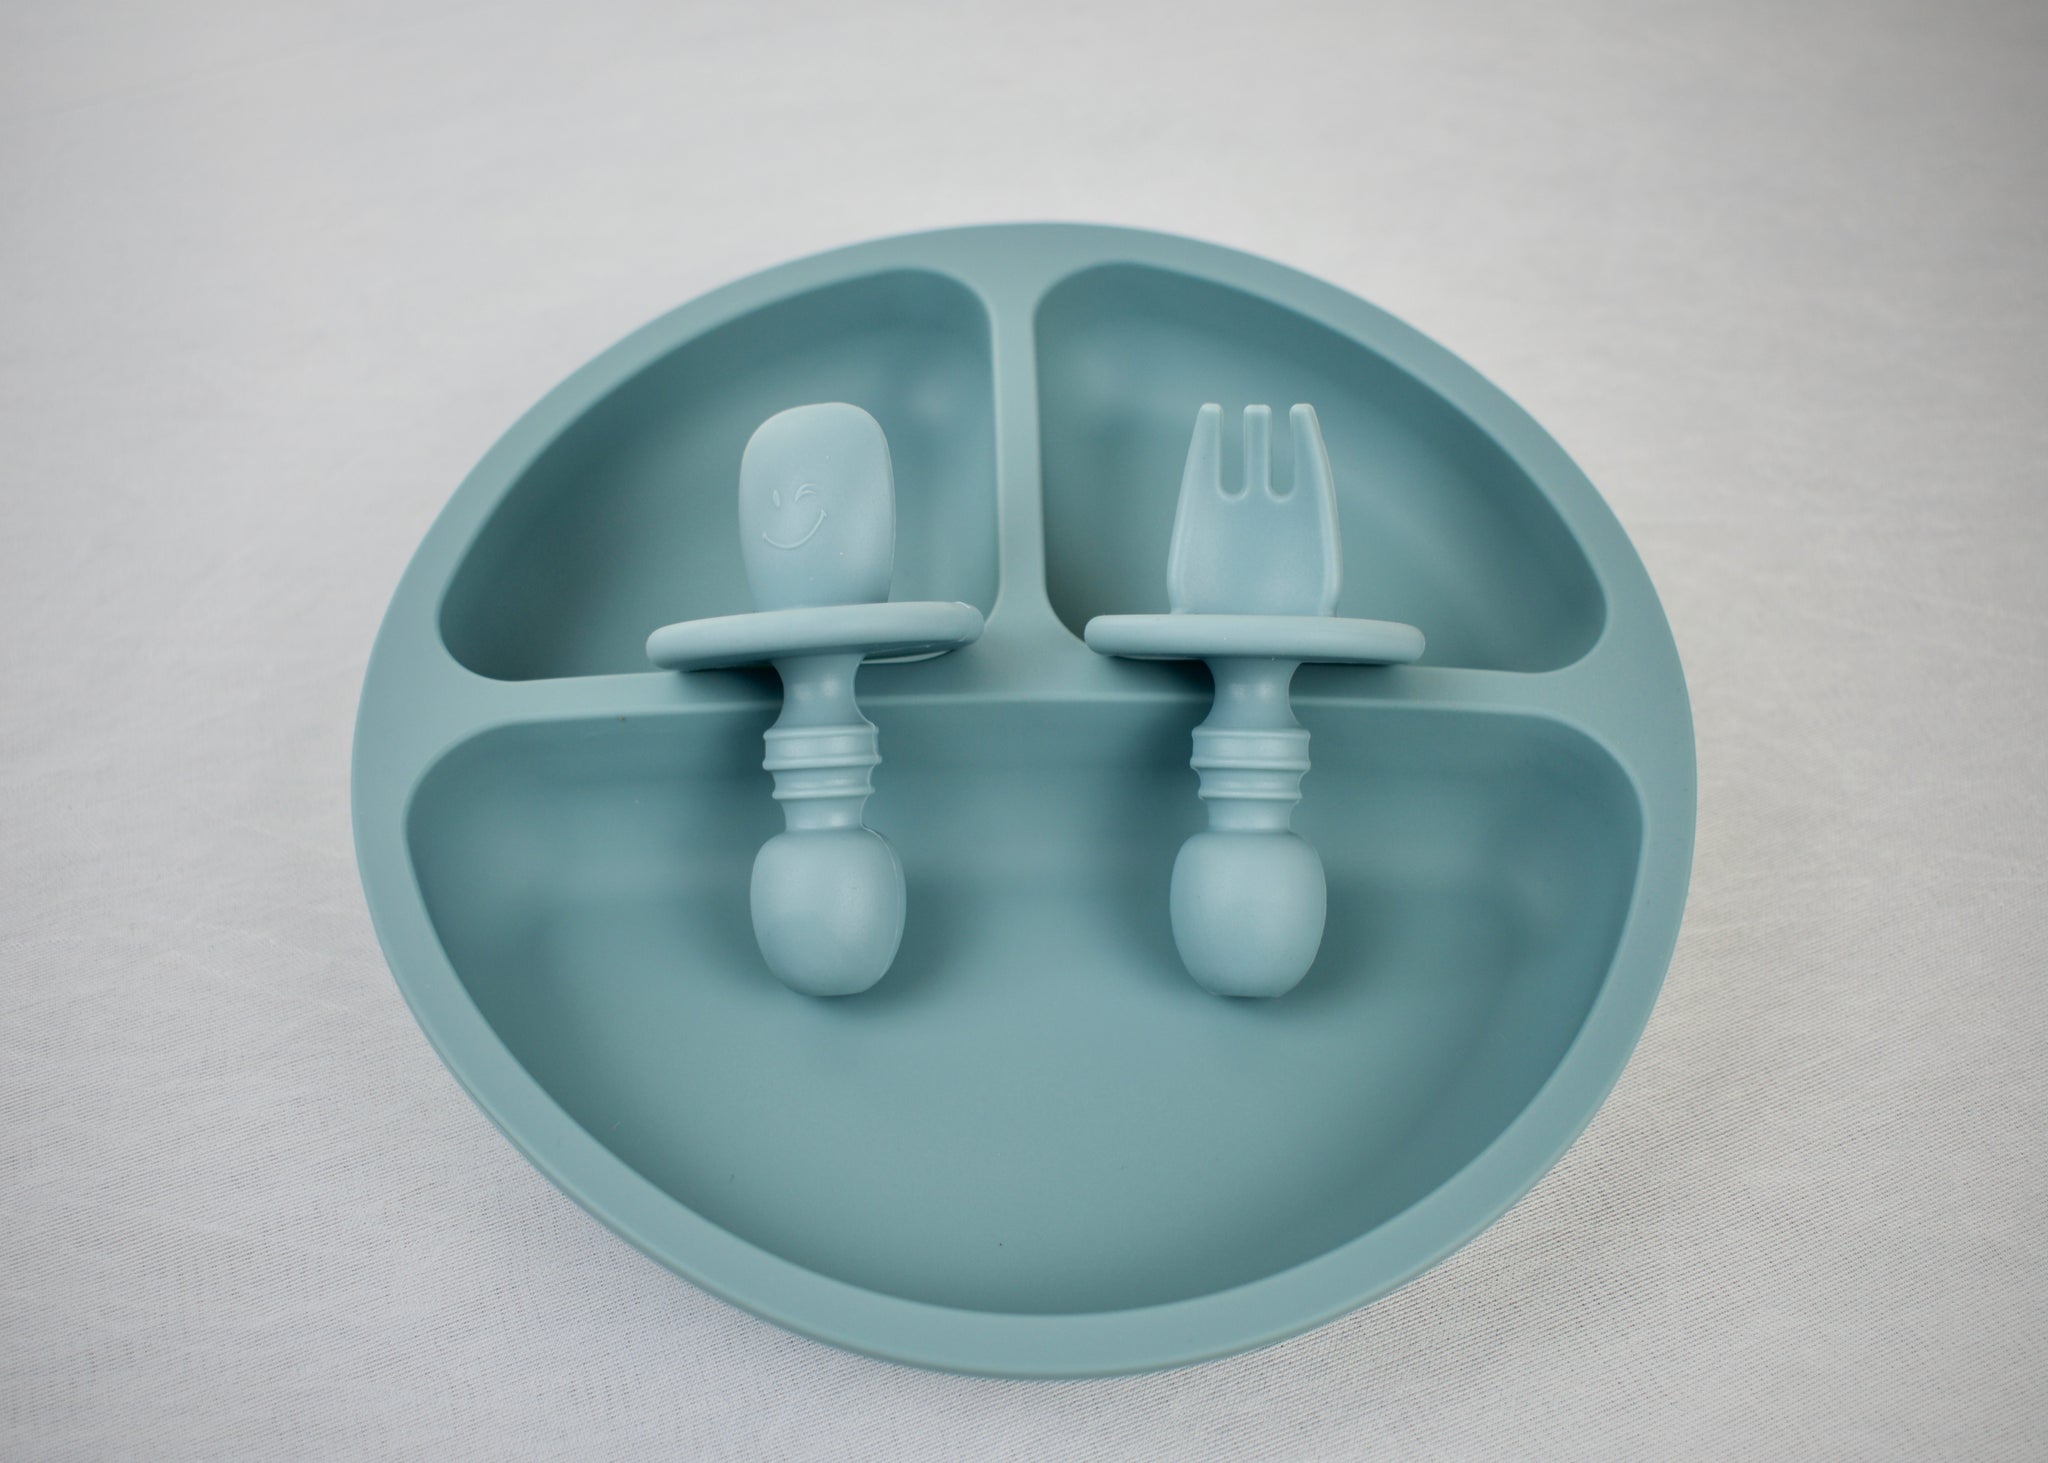 Miniware Silicone Suction Divider Plate & Cutlery Set, Exclusive on Food52